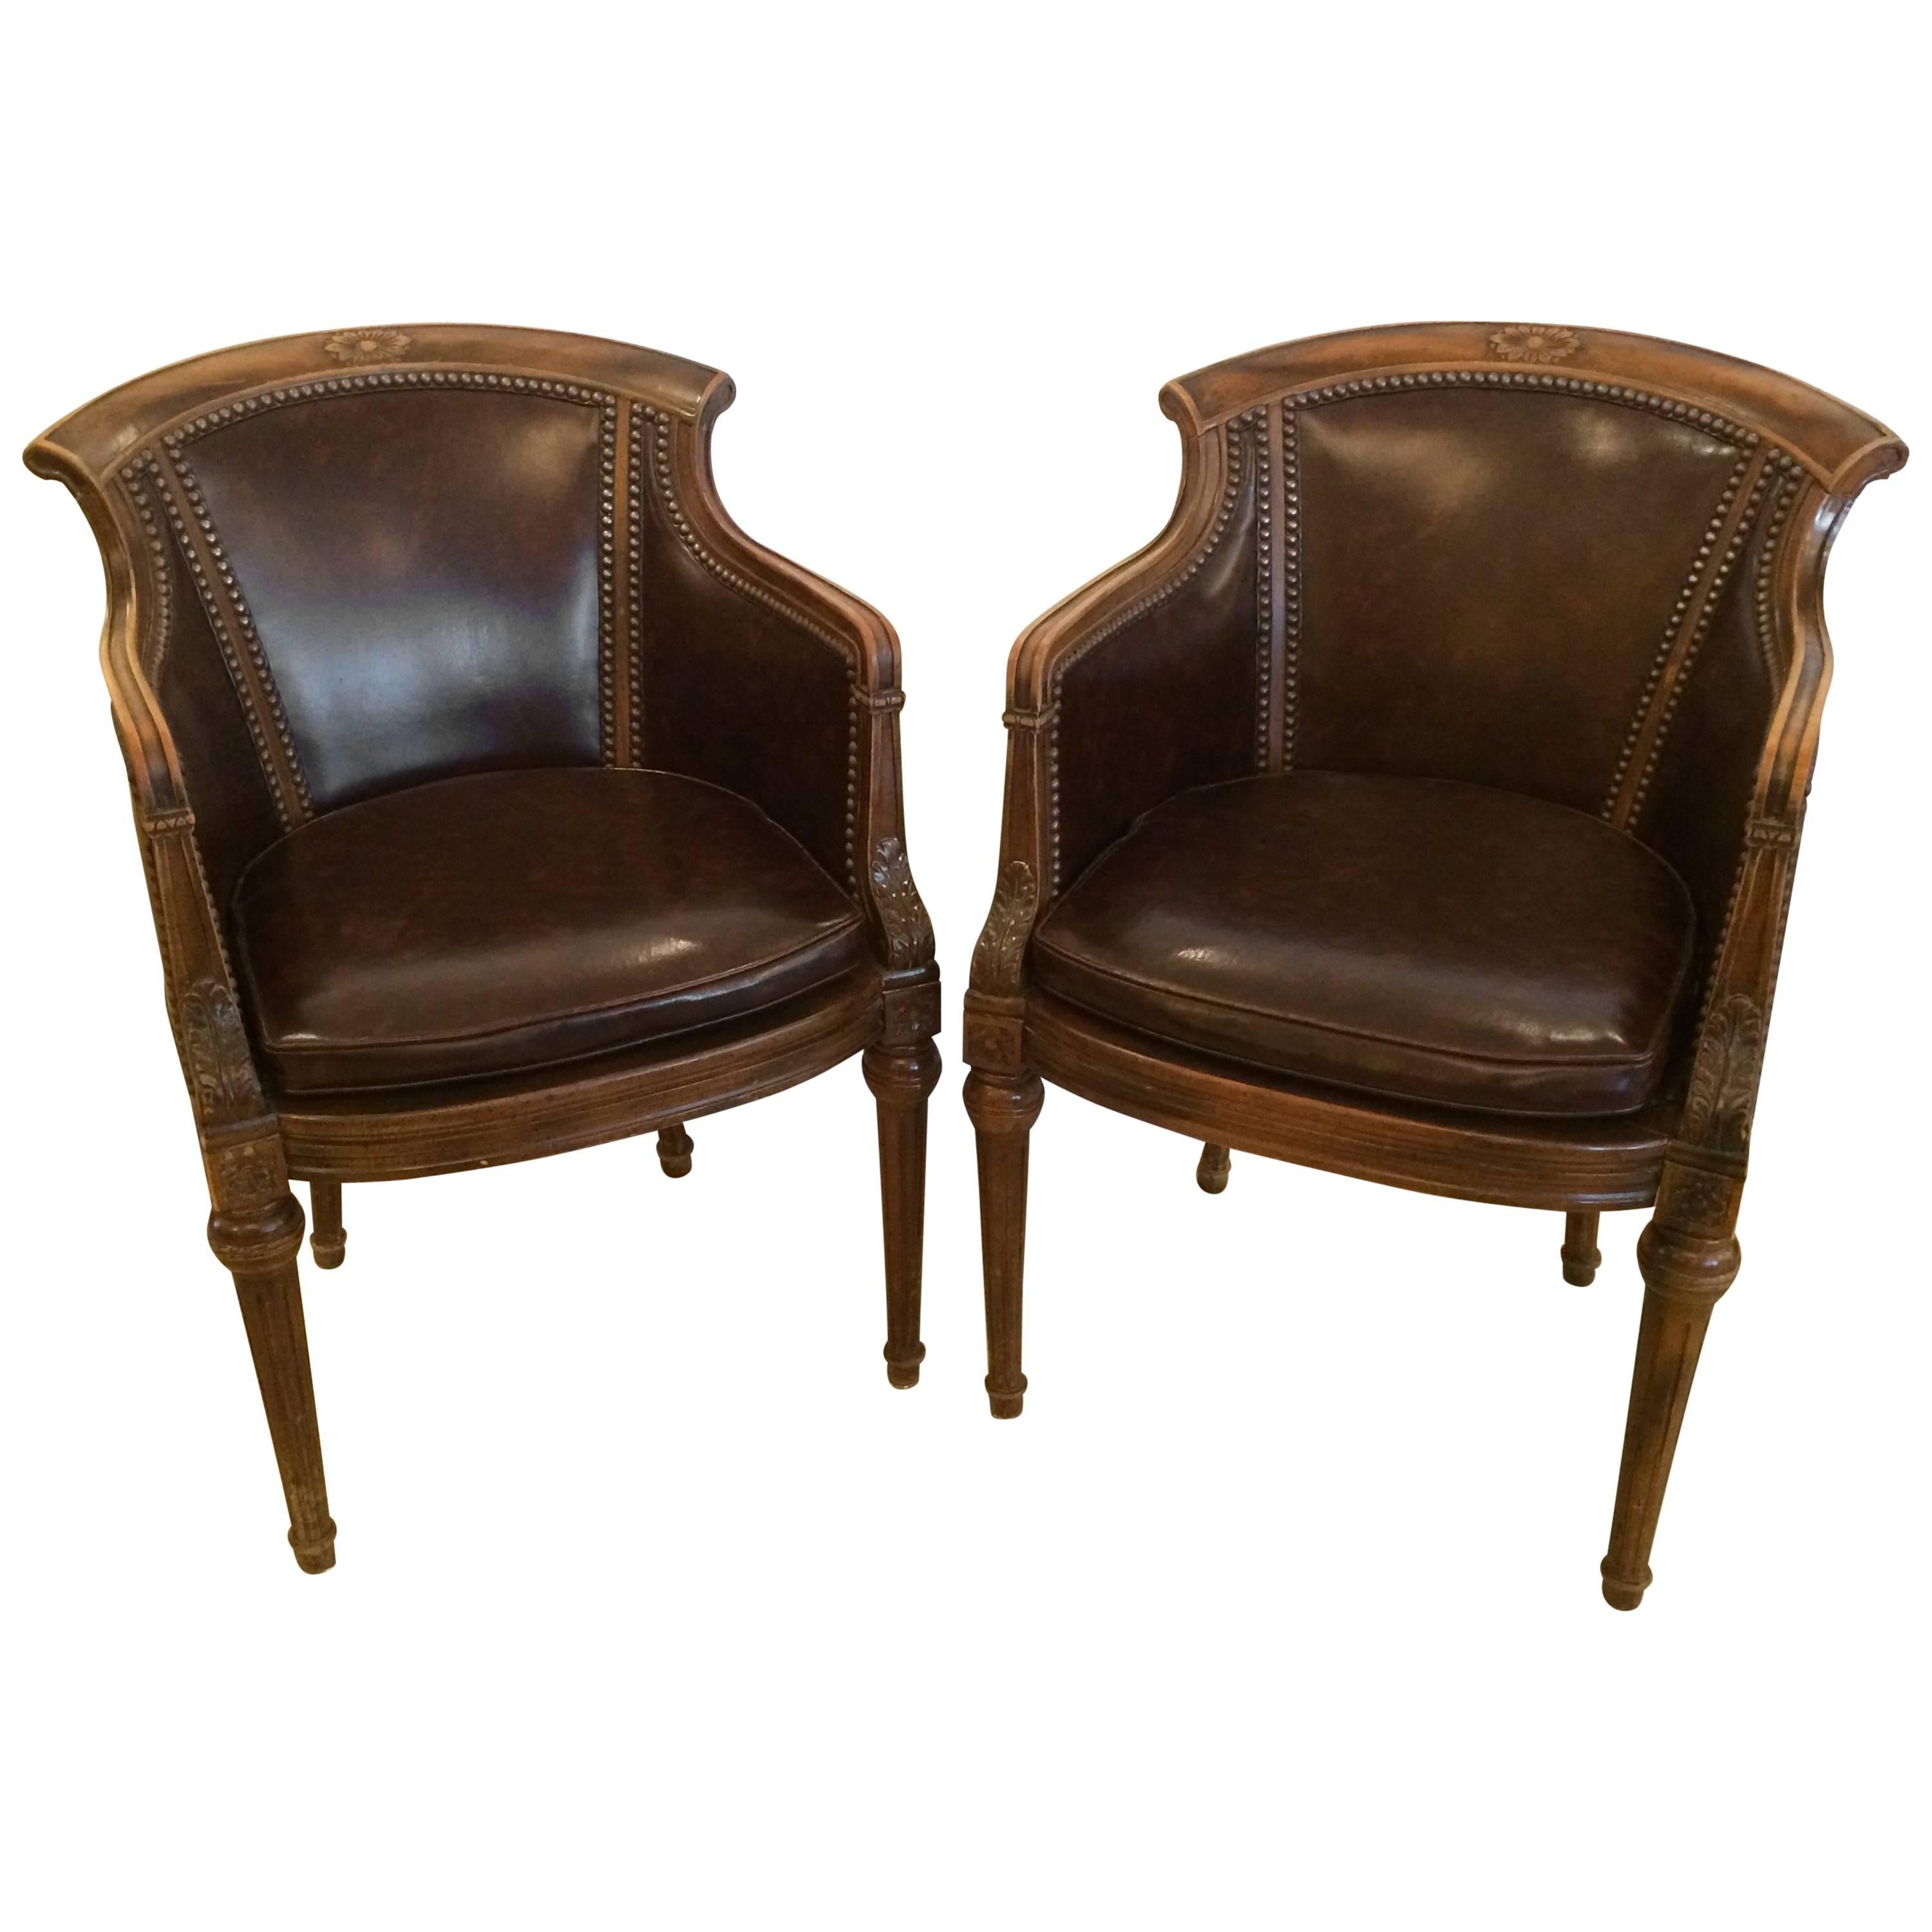 Handsome Pair of Regency Style Walnut and Tortoise Leather Club Lounge Chairs